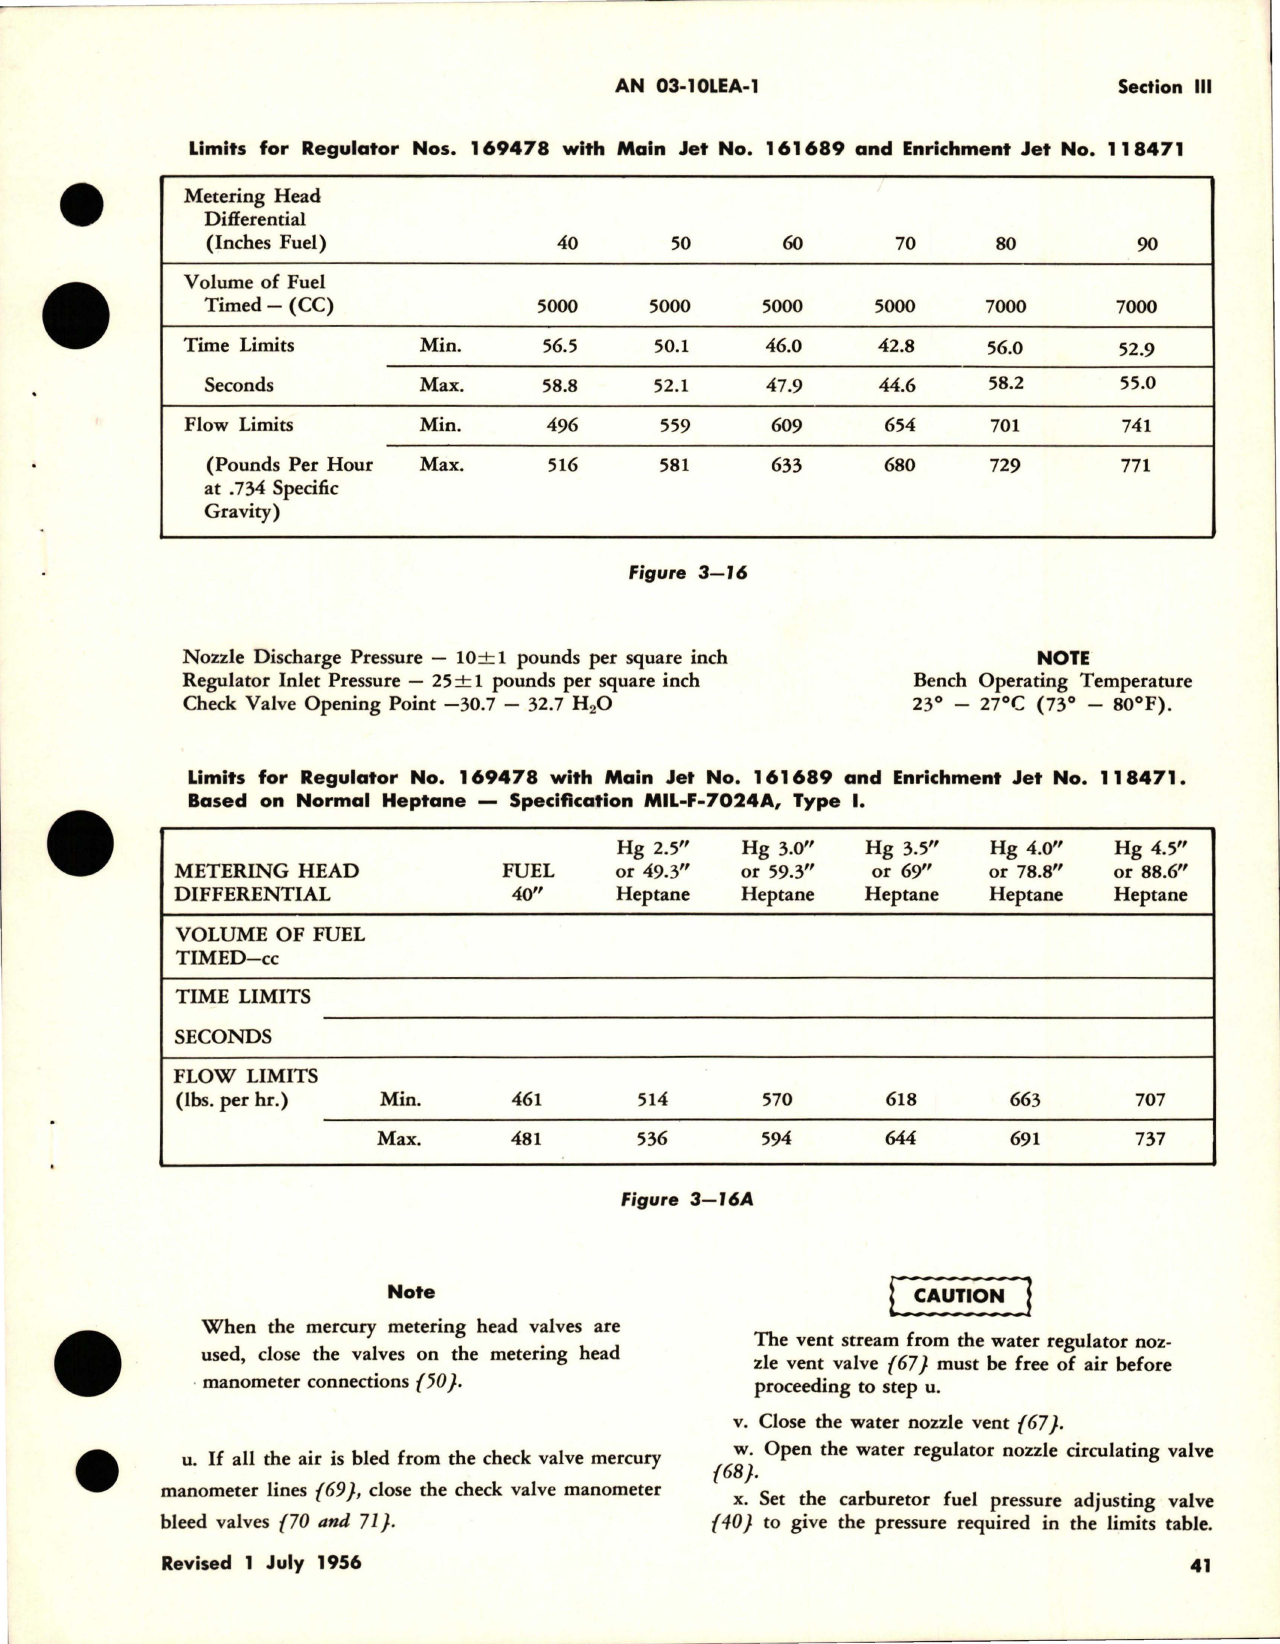 Sample page 5 from AirCorps Library document: Overhaul Instructions for Water Regulators 